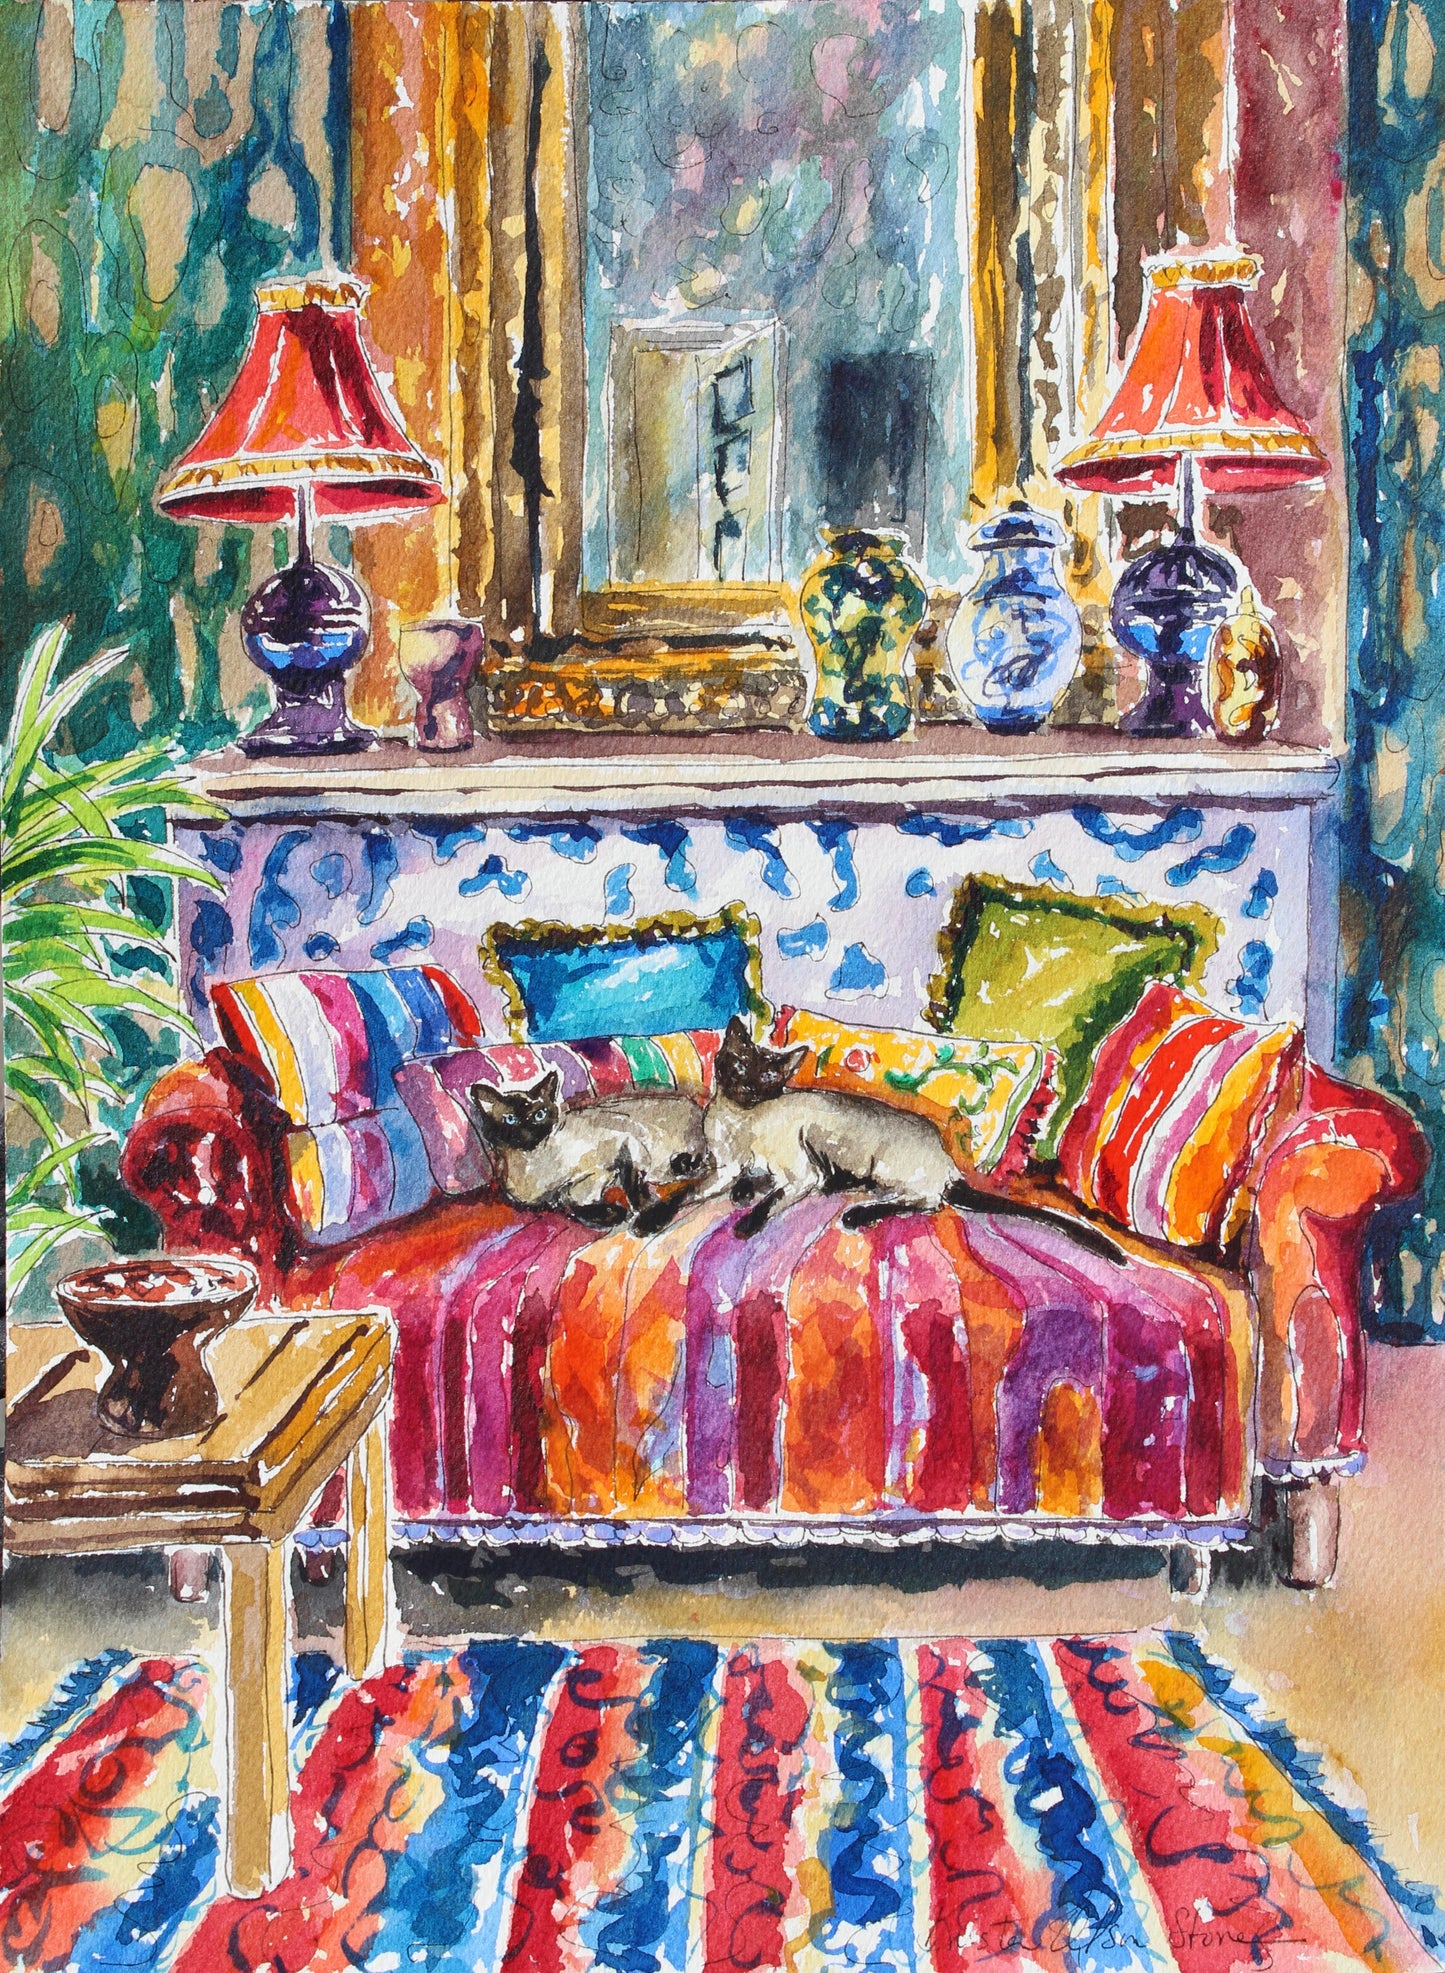 Siamese In Siam, An Original 9" x 12" Watercolor And Ink Painting Of 2 Siamese Cats In An Interior Scene